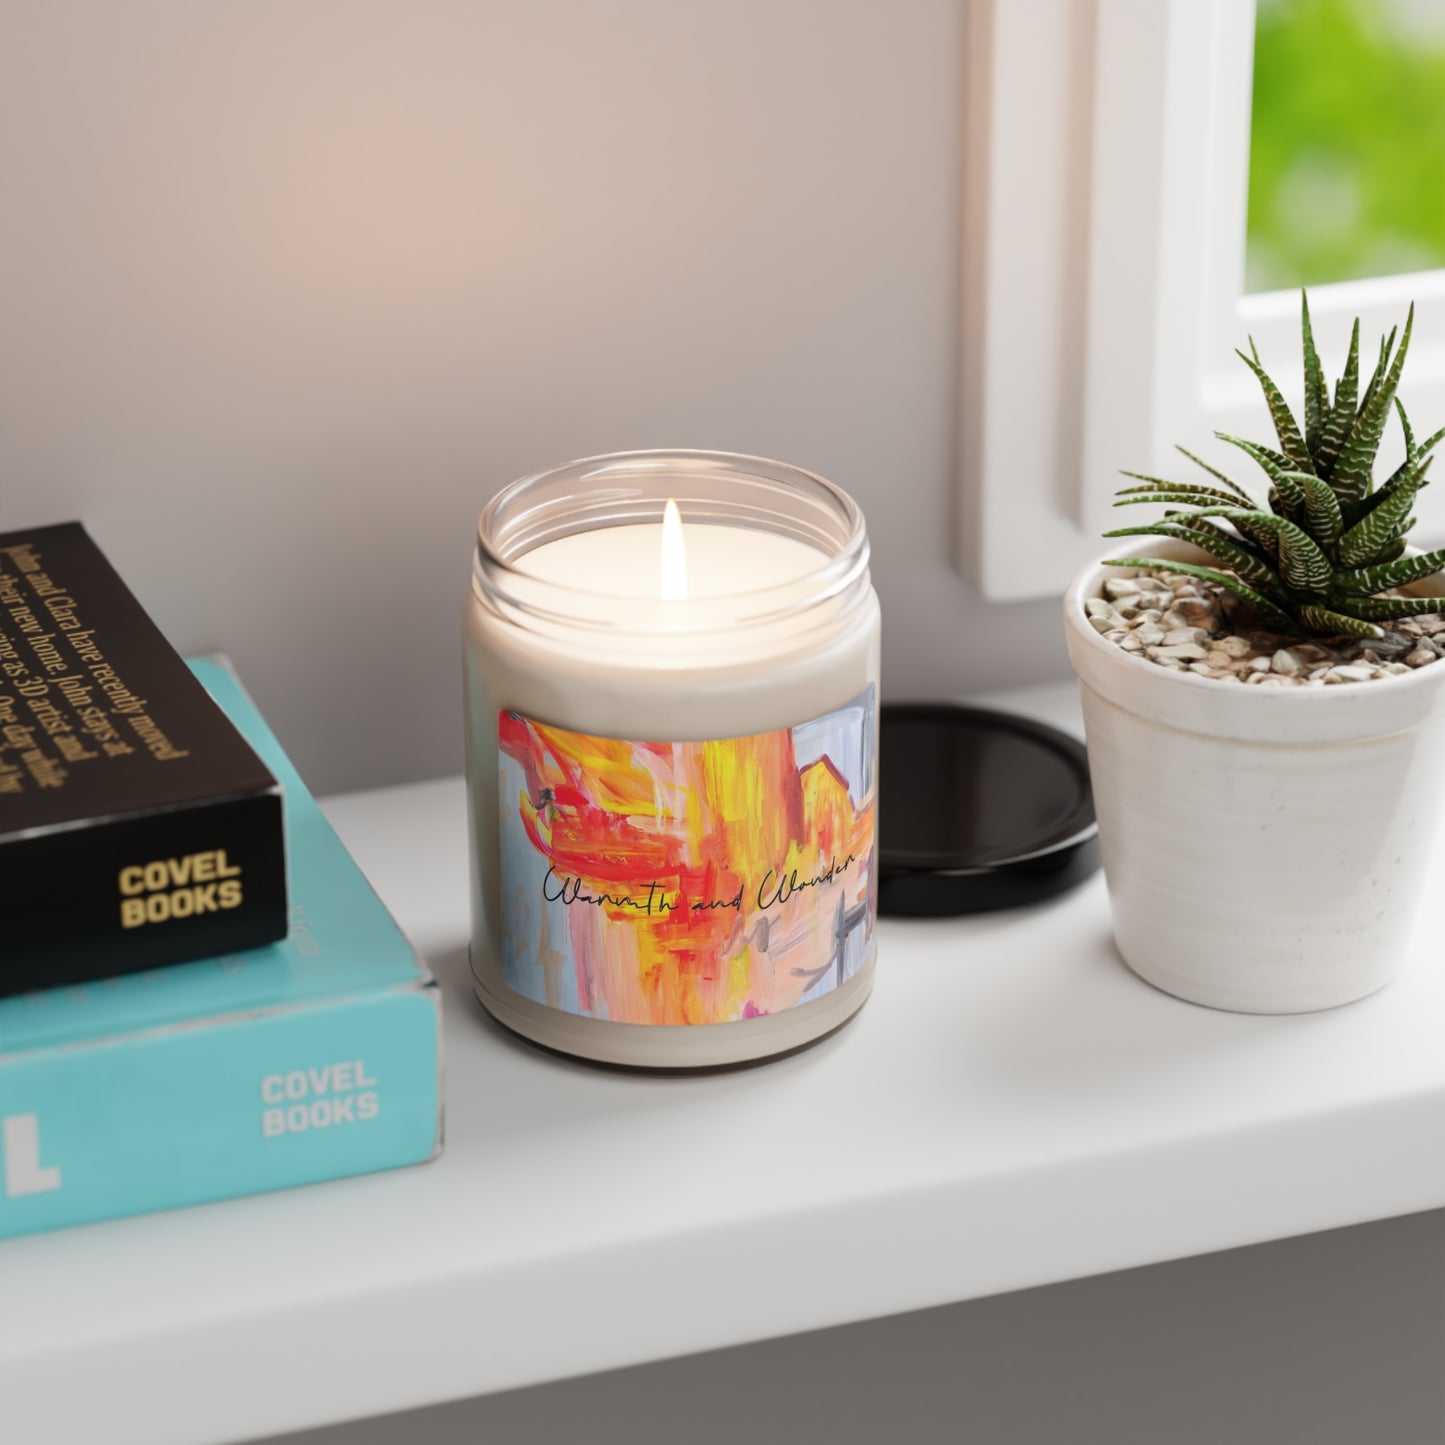 Scented Soy Candle "Warmth and Wonder"